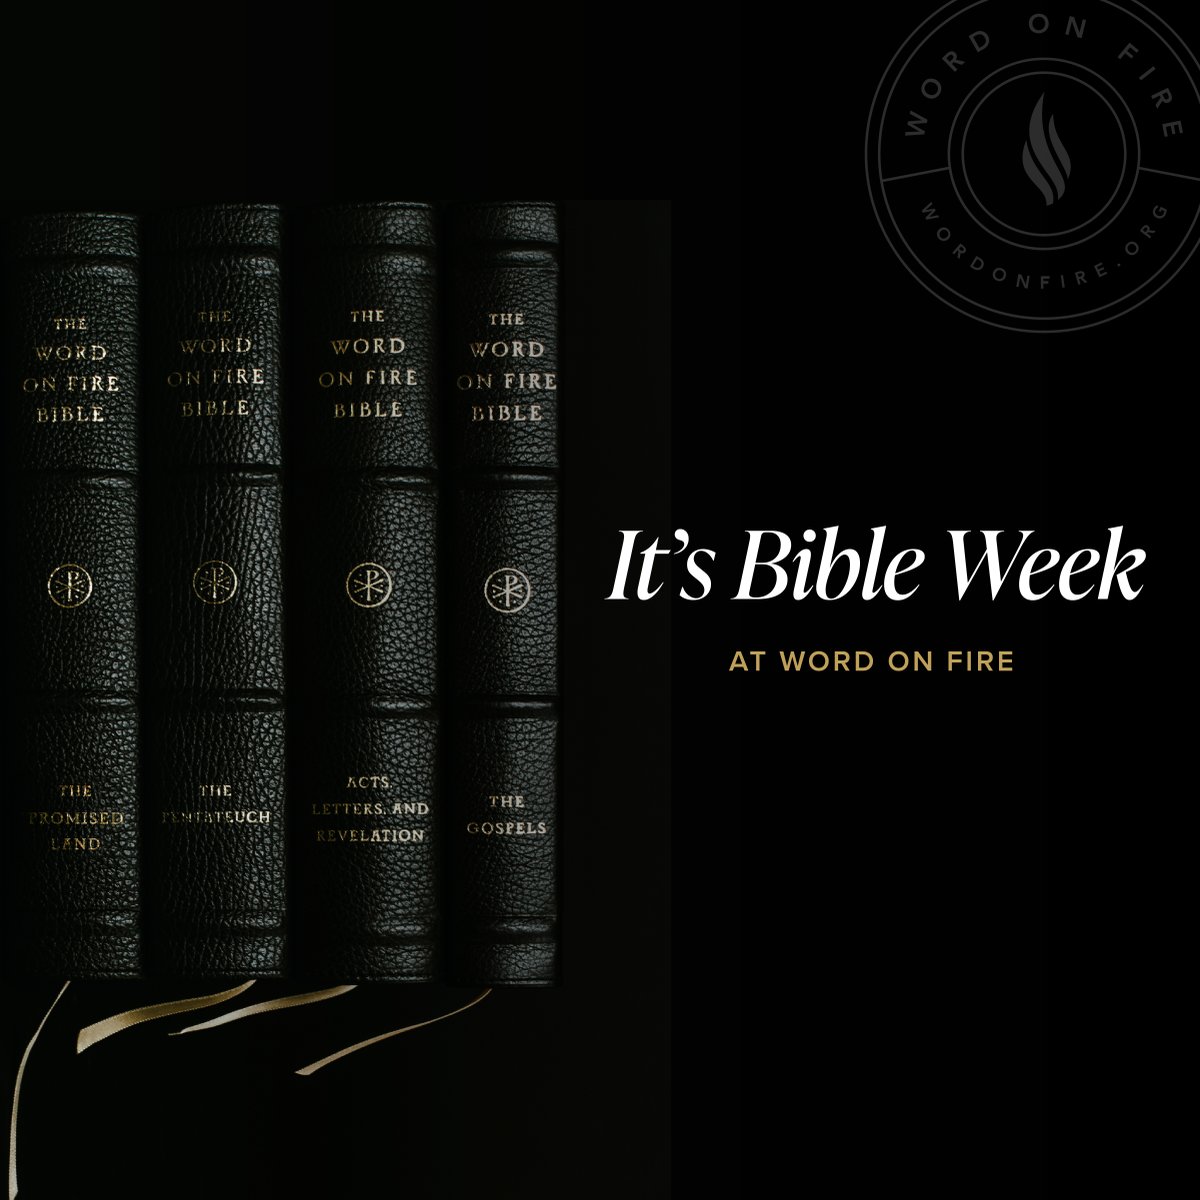 It’s Bible Week at Word on Fire! All volumes of “The Word on Fire Bible” are 20% OFF!

Experience the Bible like never before at bible.wordonfire.org.